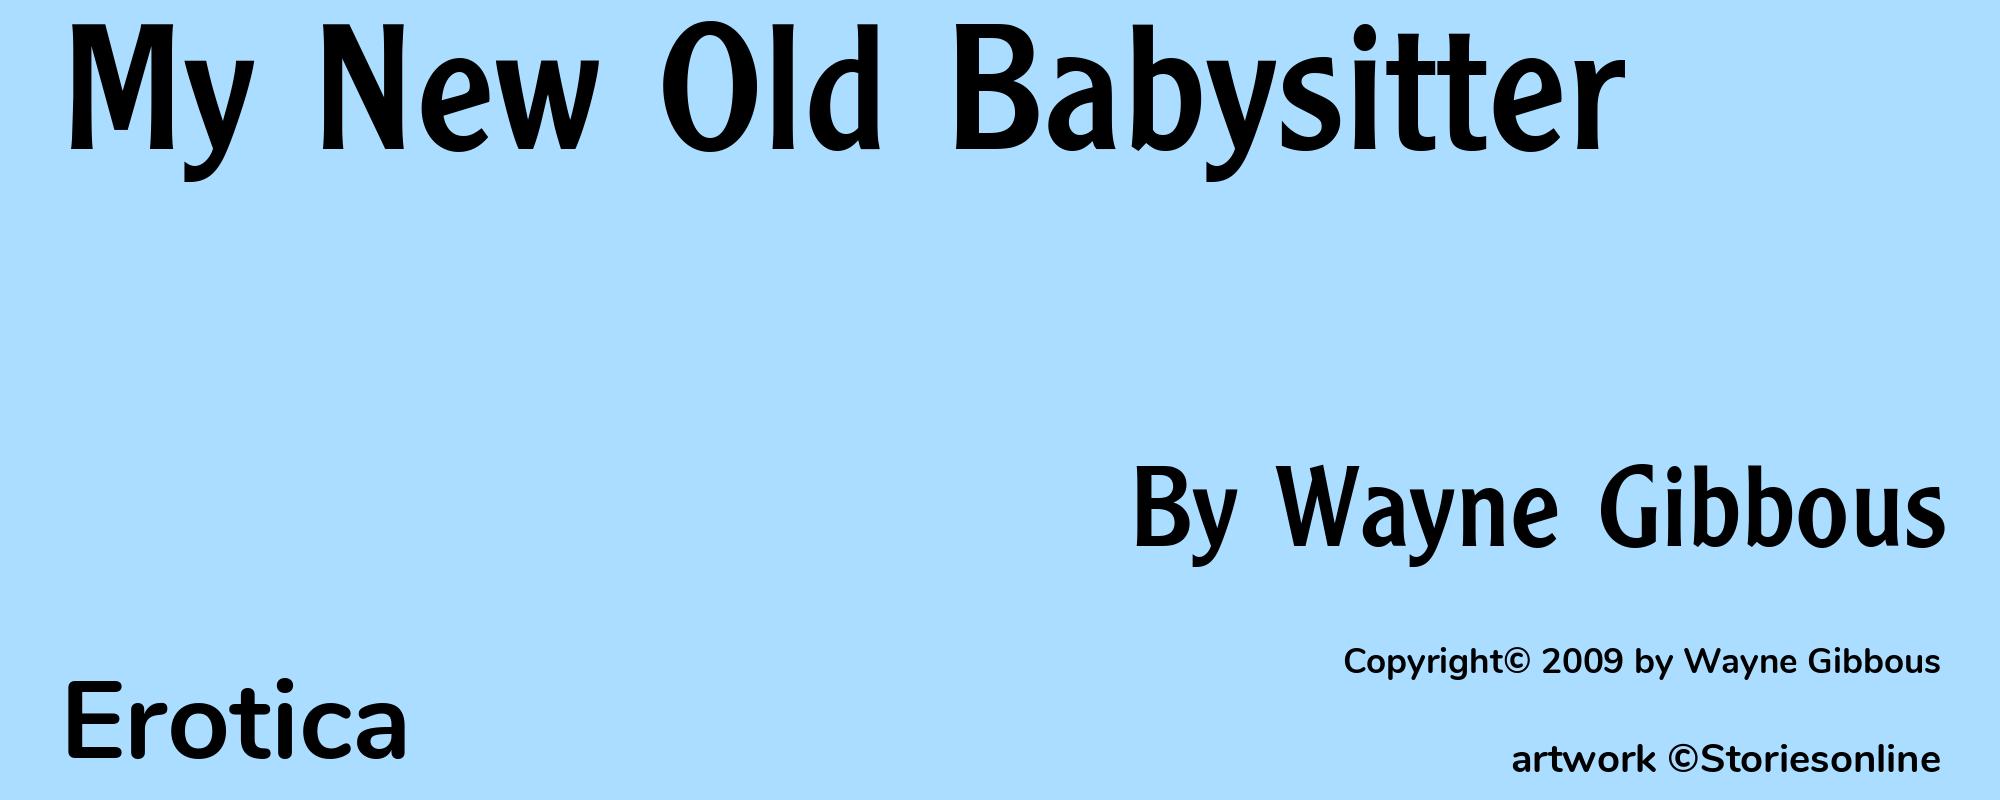 My New Old Babysitter - Cover